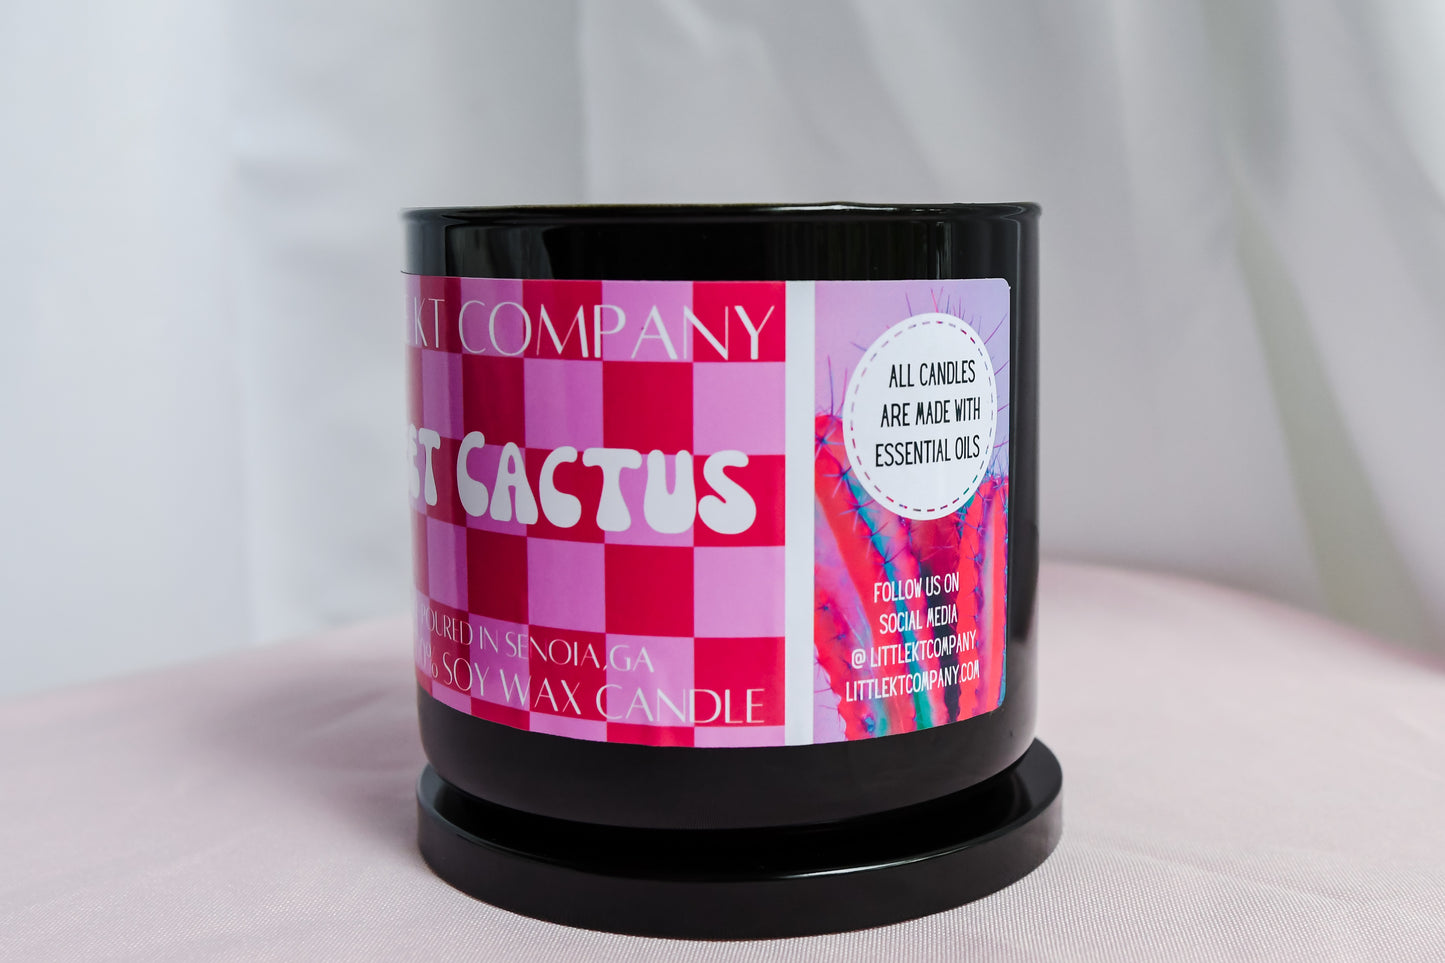 Sweet Cactus Candle